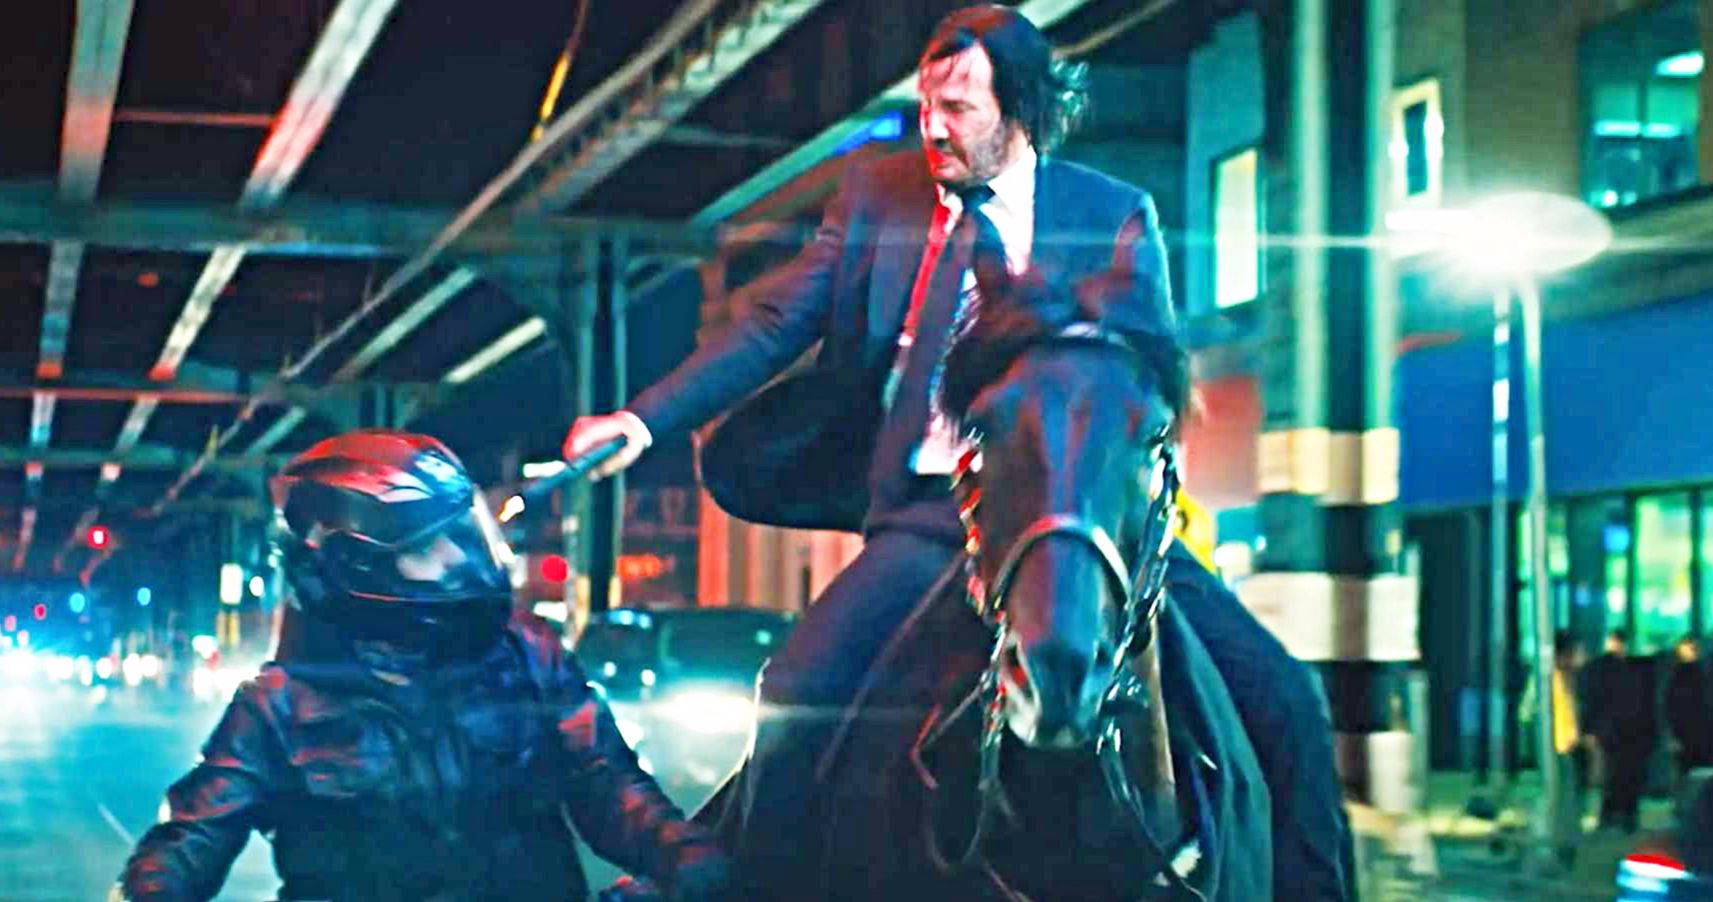 John Wick 4 Stunts Have the Director Waking Up in a Cold Sweat: How Do I Beat Horses?